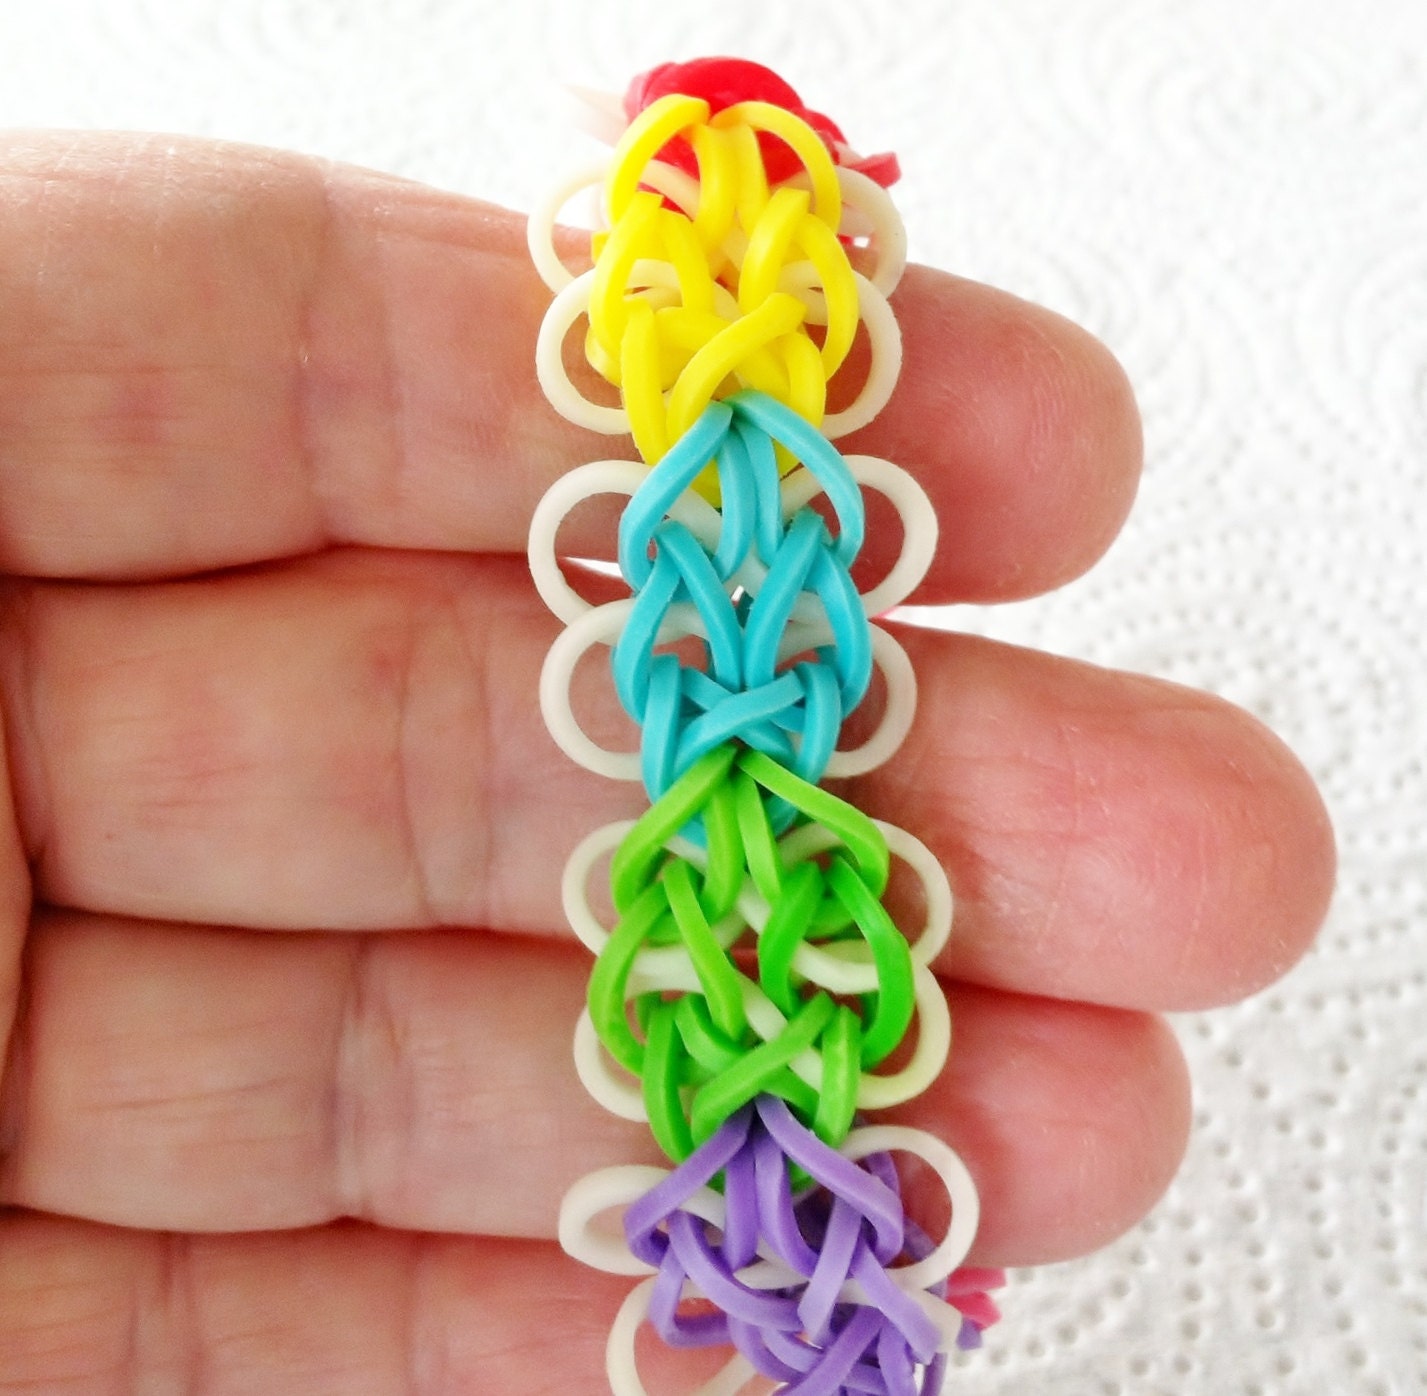 RAINBOW LOOM Bracelet In Sweet Butterfly Design. This is For